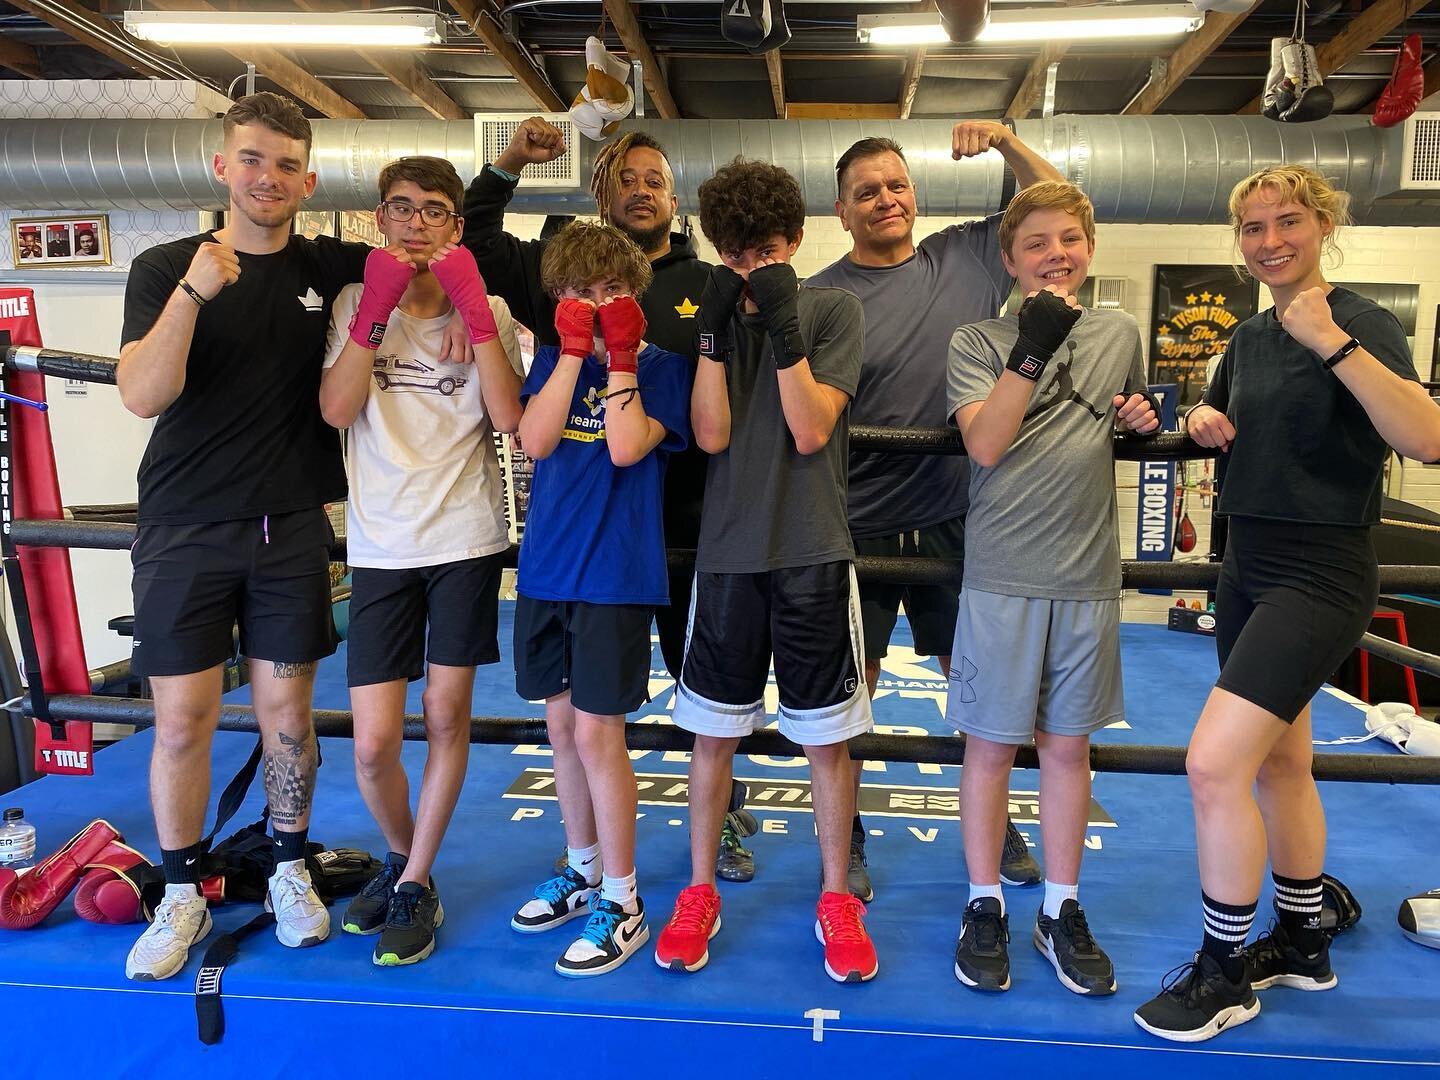 Four new future champs 🥊💪🏼
We had a blast working with the boys from St. Thomas over the weekend. Keep up all the hard work and you can achieve anything 👊🏼🔥. #proper #boxing #club #great #striveforgreatness #phoenix #az #hardwork #stthomas #wor